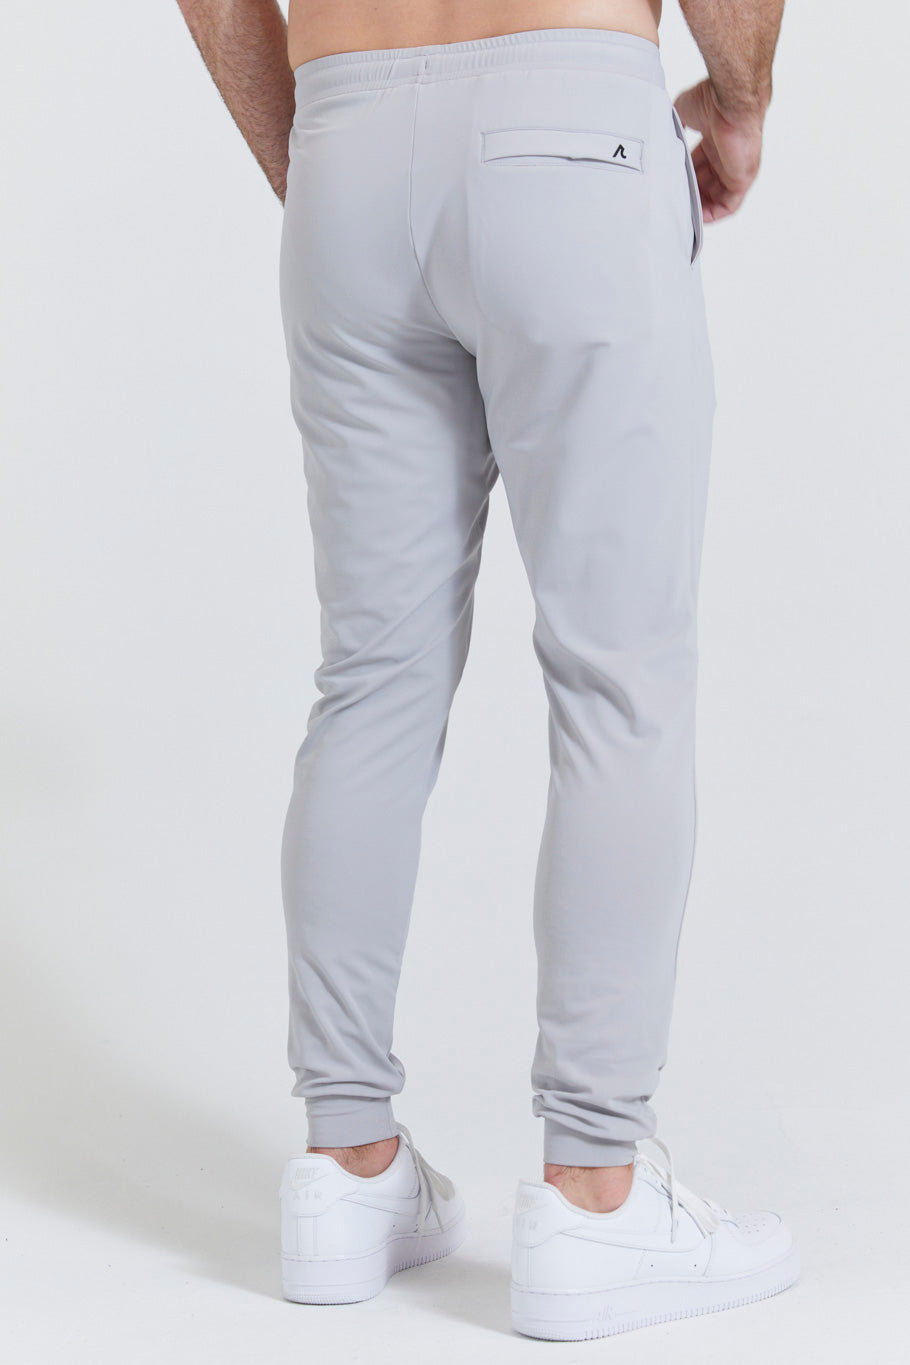 Image of the donahue jogger in glacier gray